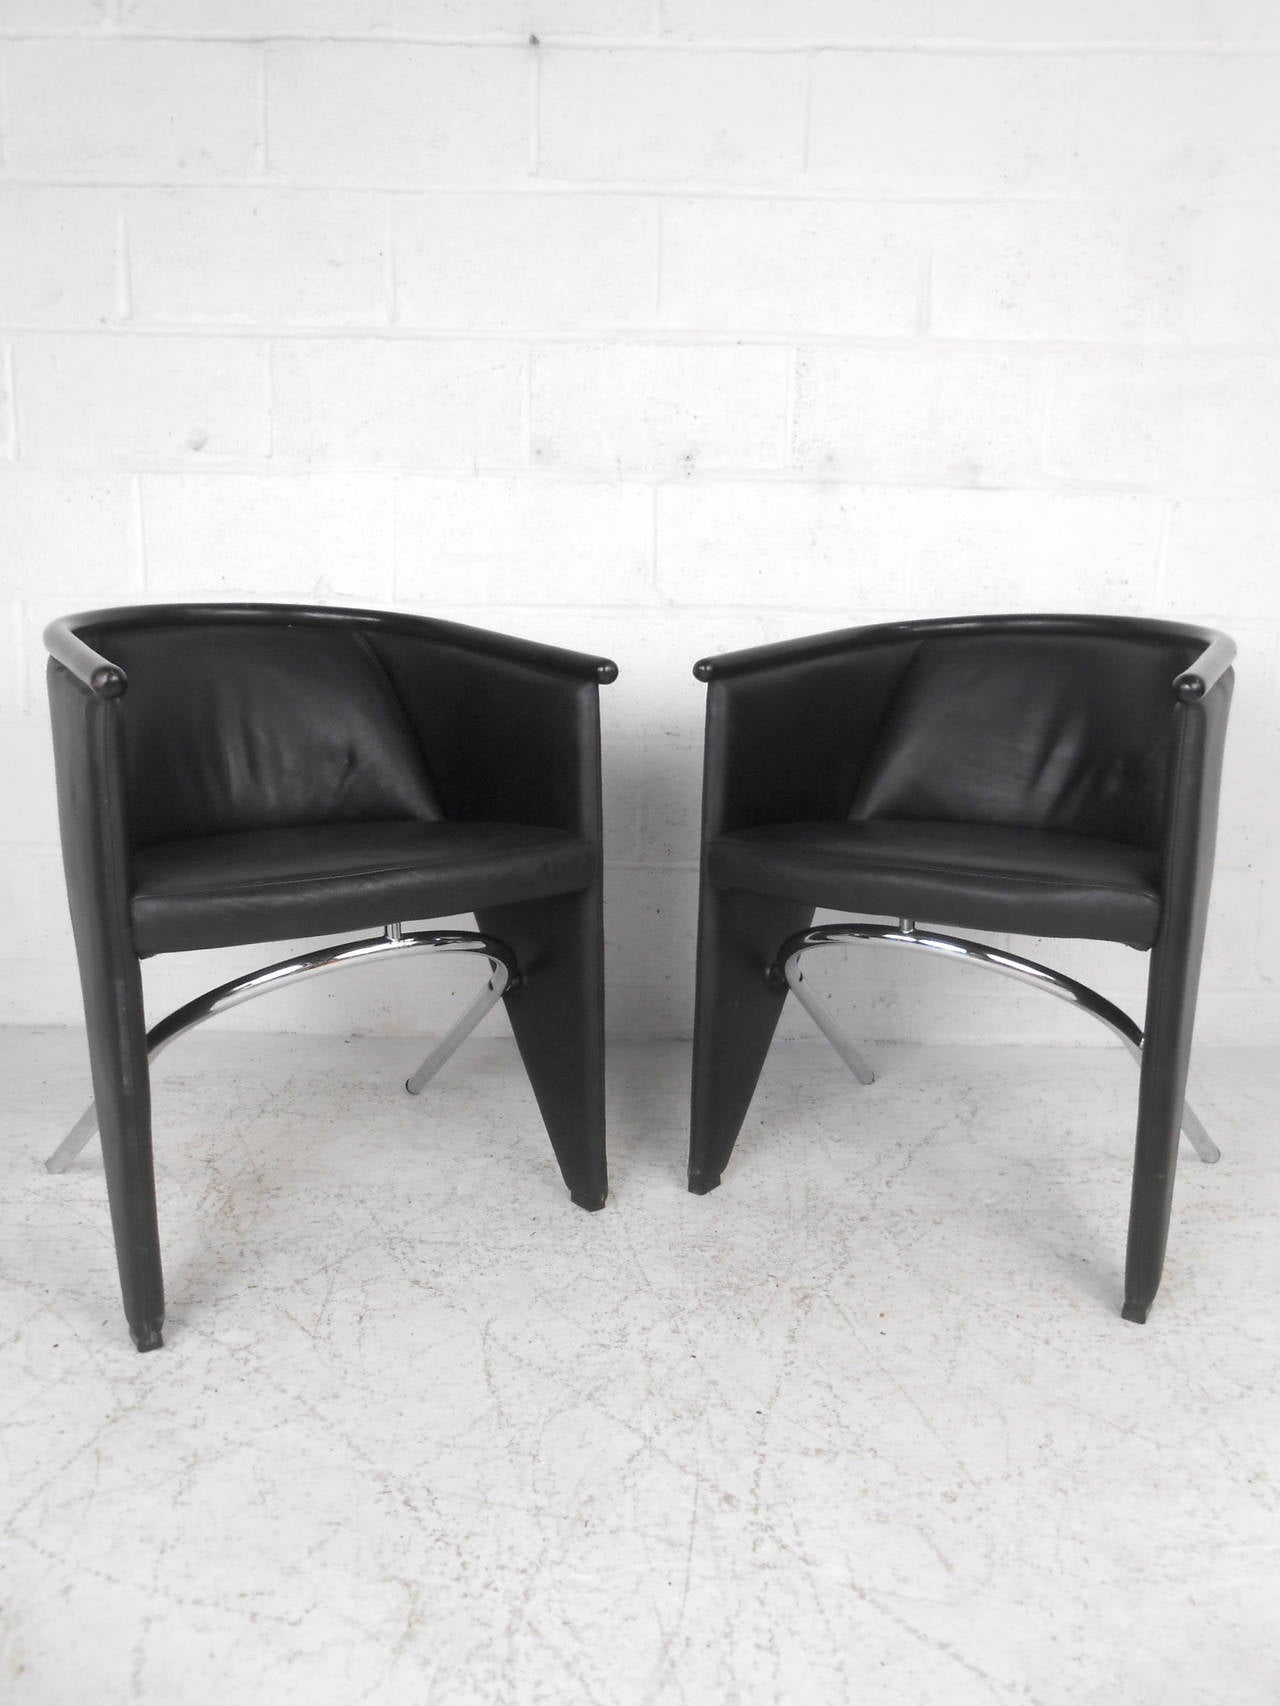 This pair of club chairs feature a unique construction combining beautiful black leather upholstery and polished chrome legs which offer a modern accent to any home or office space.  

Please confirm item location (NY or NJ) with dealer.